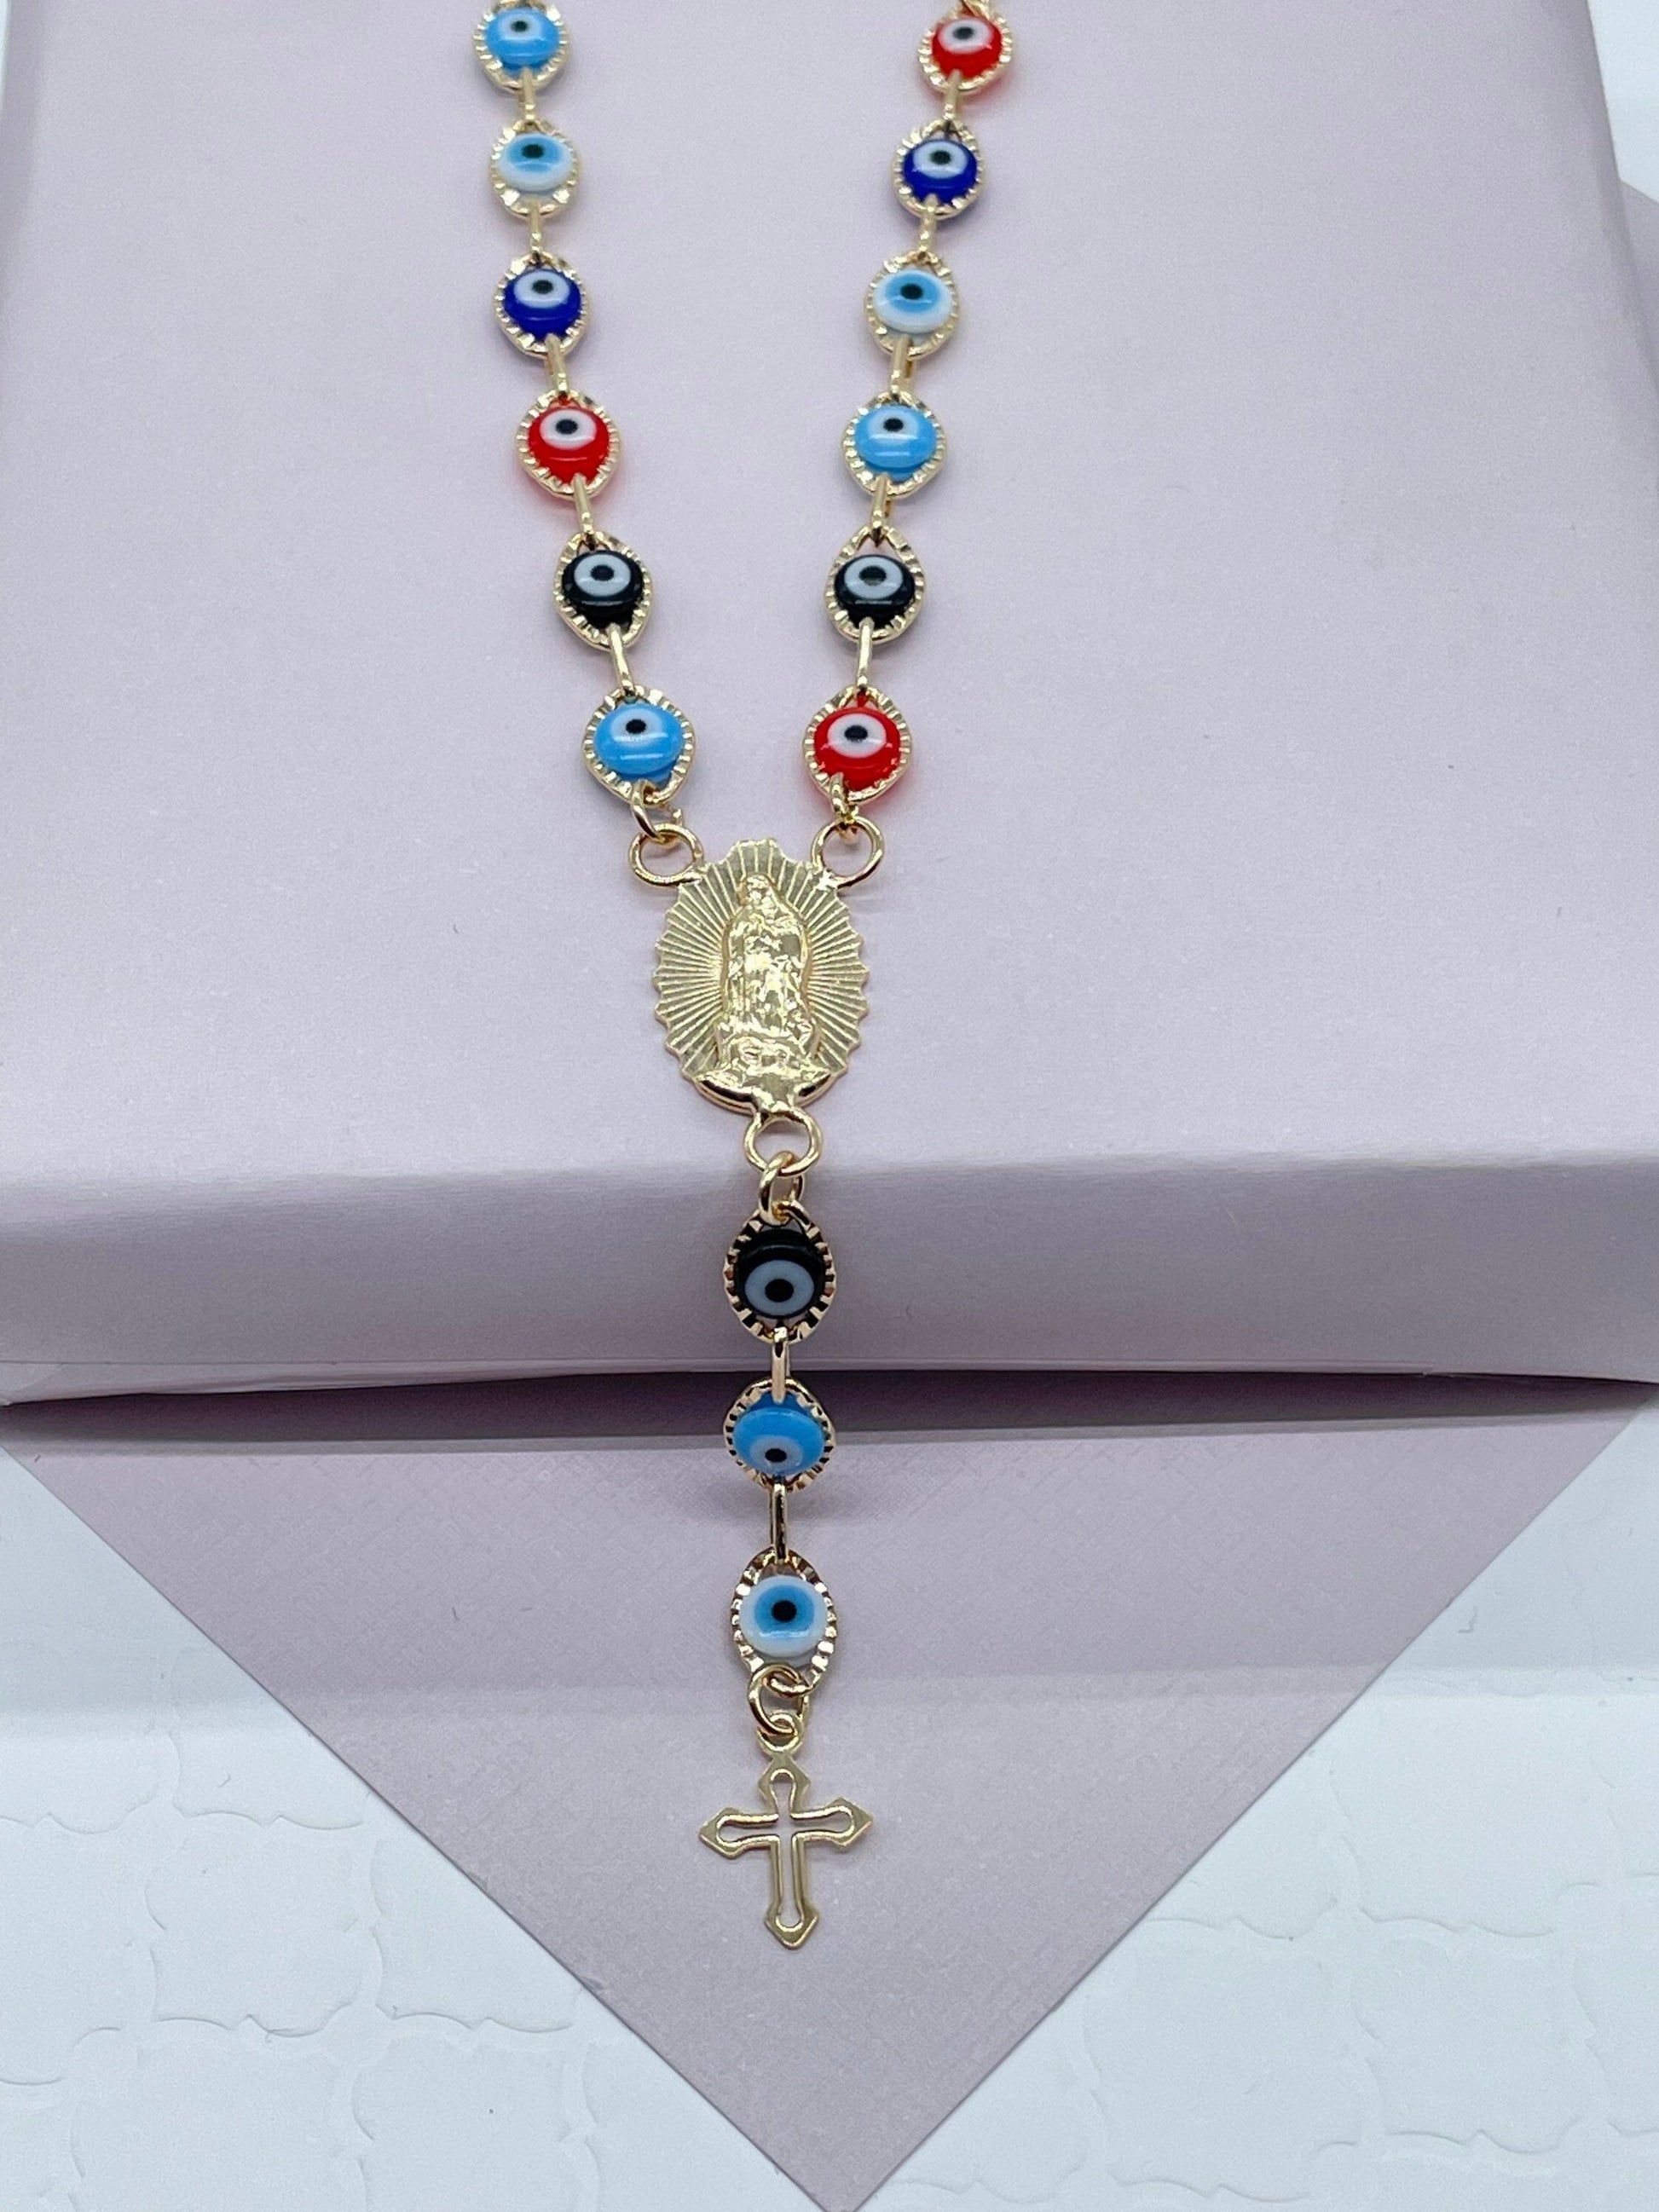 18k Gold Filled Evil Eye Fashion Rosary Style Necklace Featuring Our Lady Of Guadalupe, Trendy Religious Protection Necklace